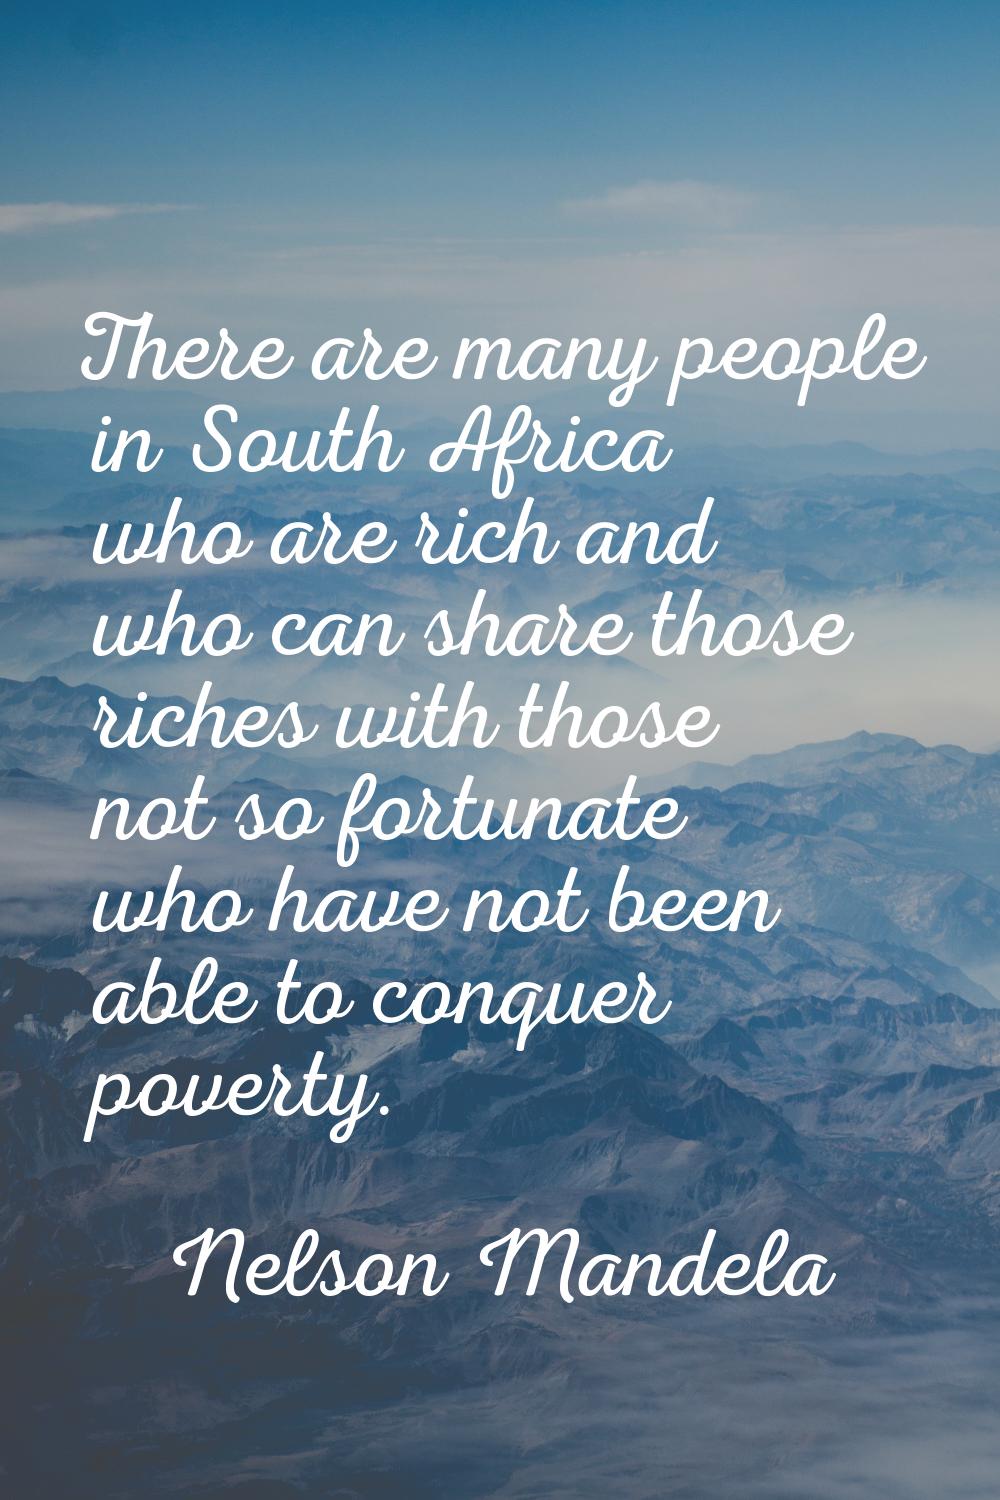 There are many people in South Africa who are rich and who can share those riches with those not so